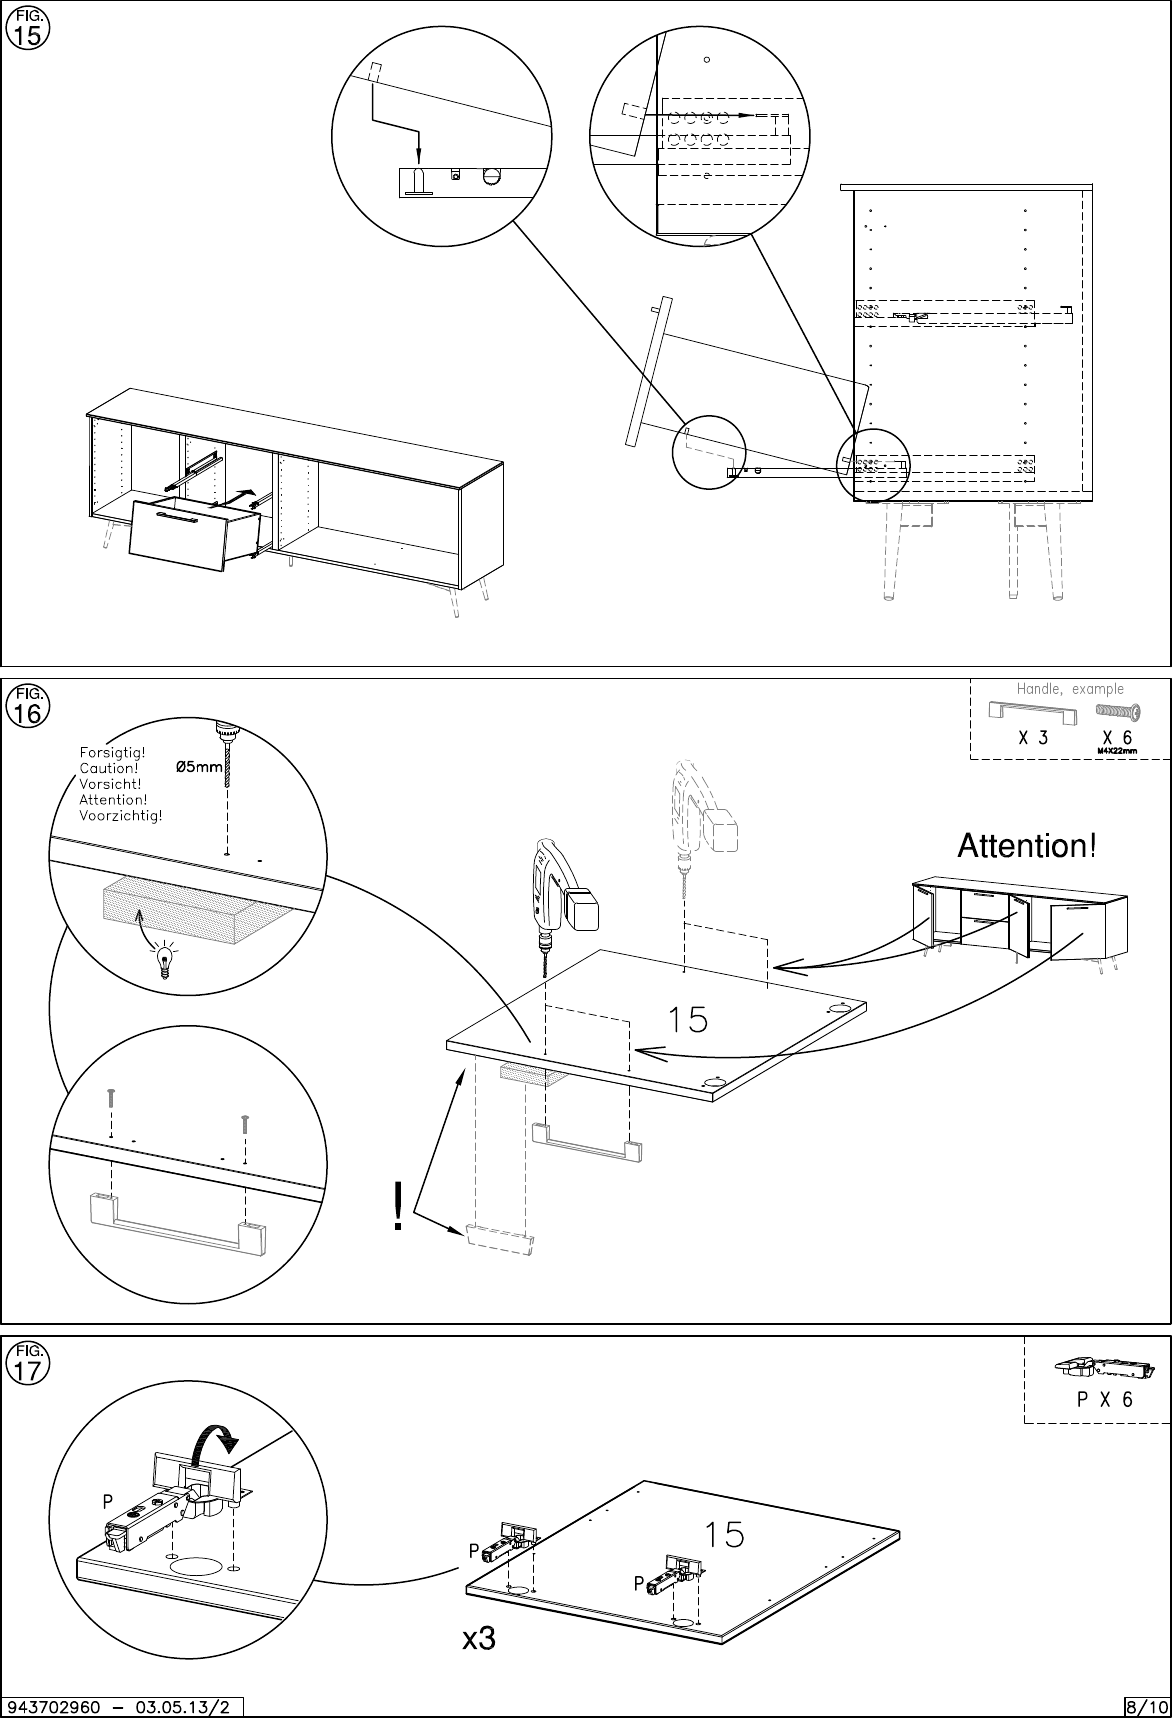 Page 8 of 10 - Boconcept Boconcept--2960-Assembly-Instruction B:\DK_PTA_Share\Inventor Ation\_AI,  & Comb\370 - Occa\943702960_v2_10 Layout1